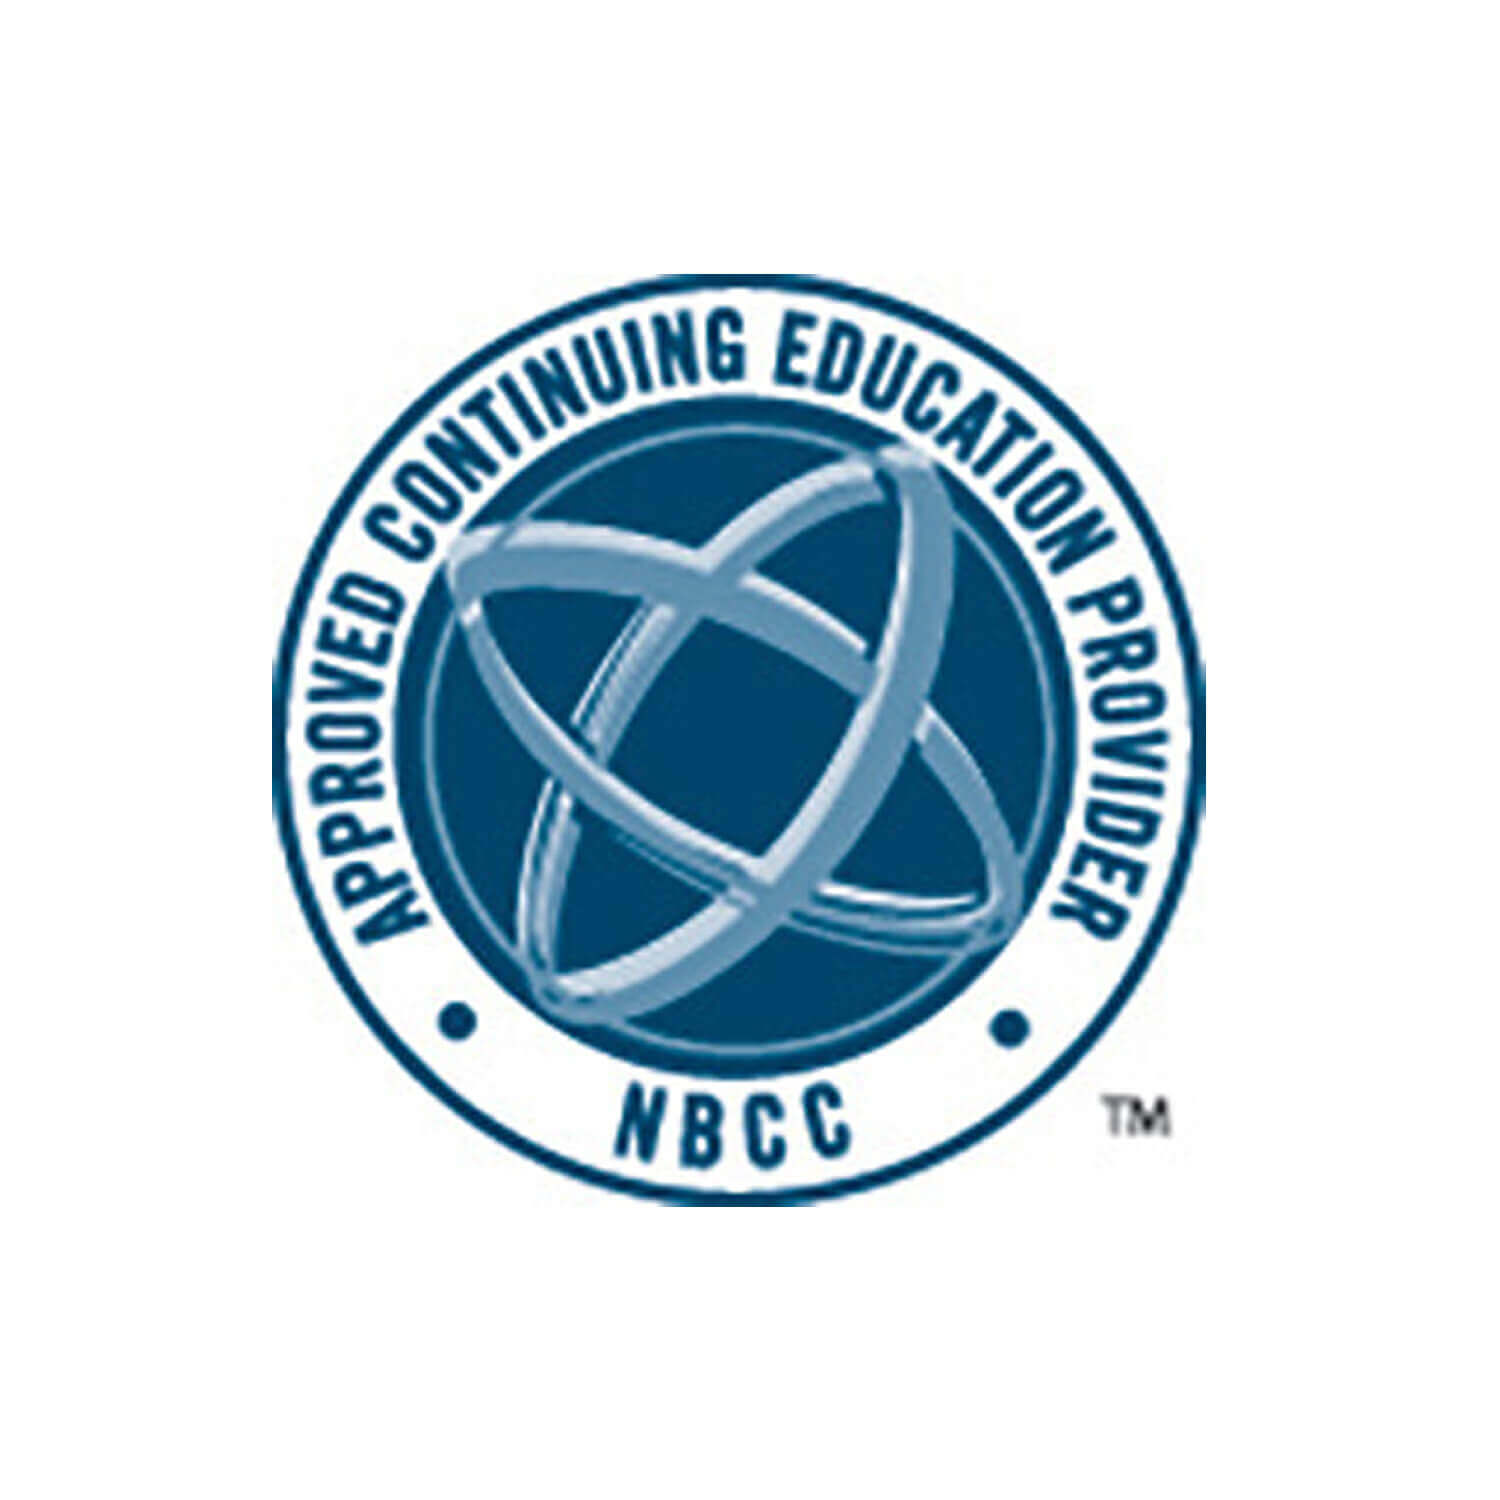 NBCC Approved Continuing Education Provider